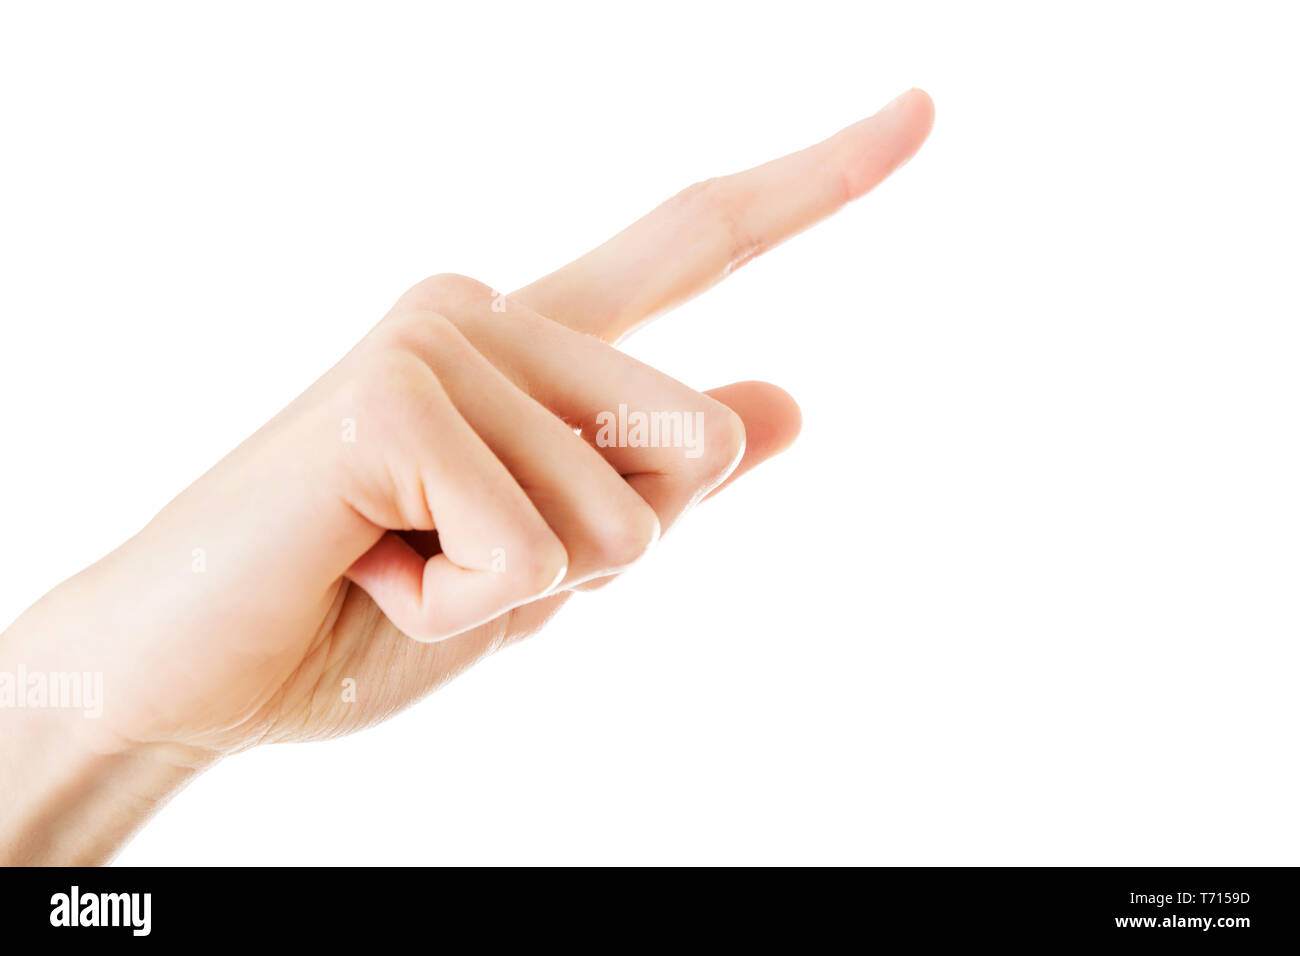 Female hand with finger showing or pressing something on white background. Stock Photo